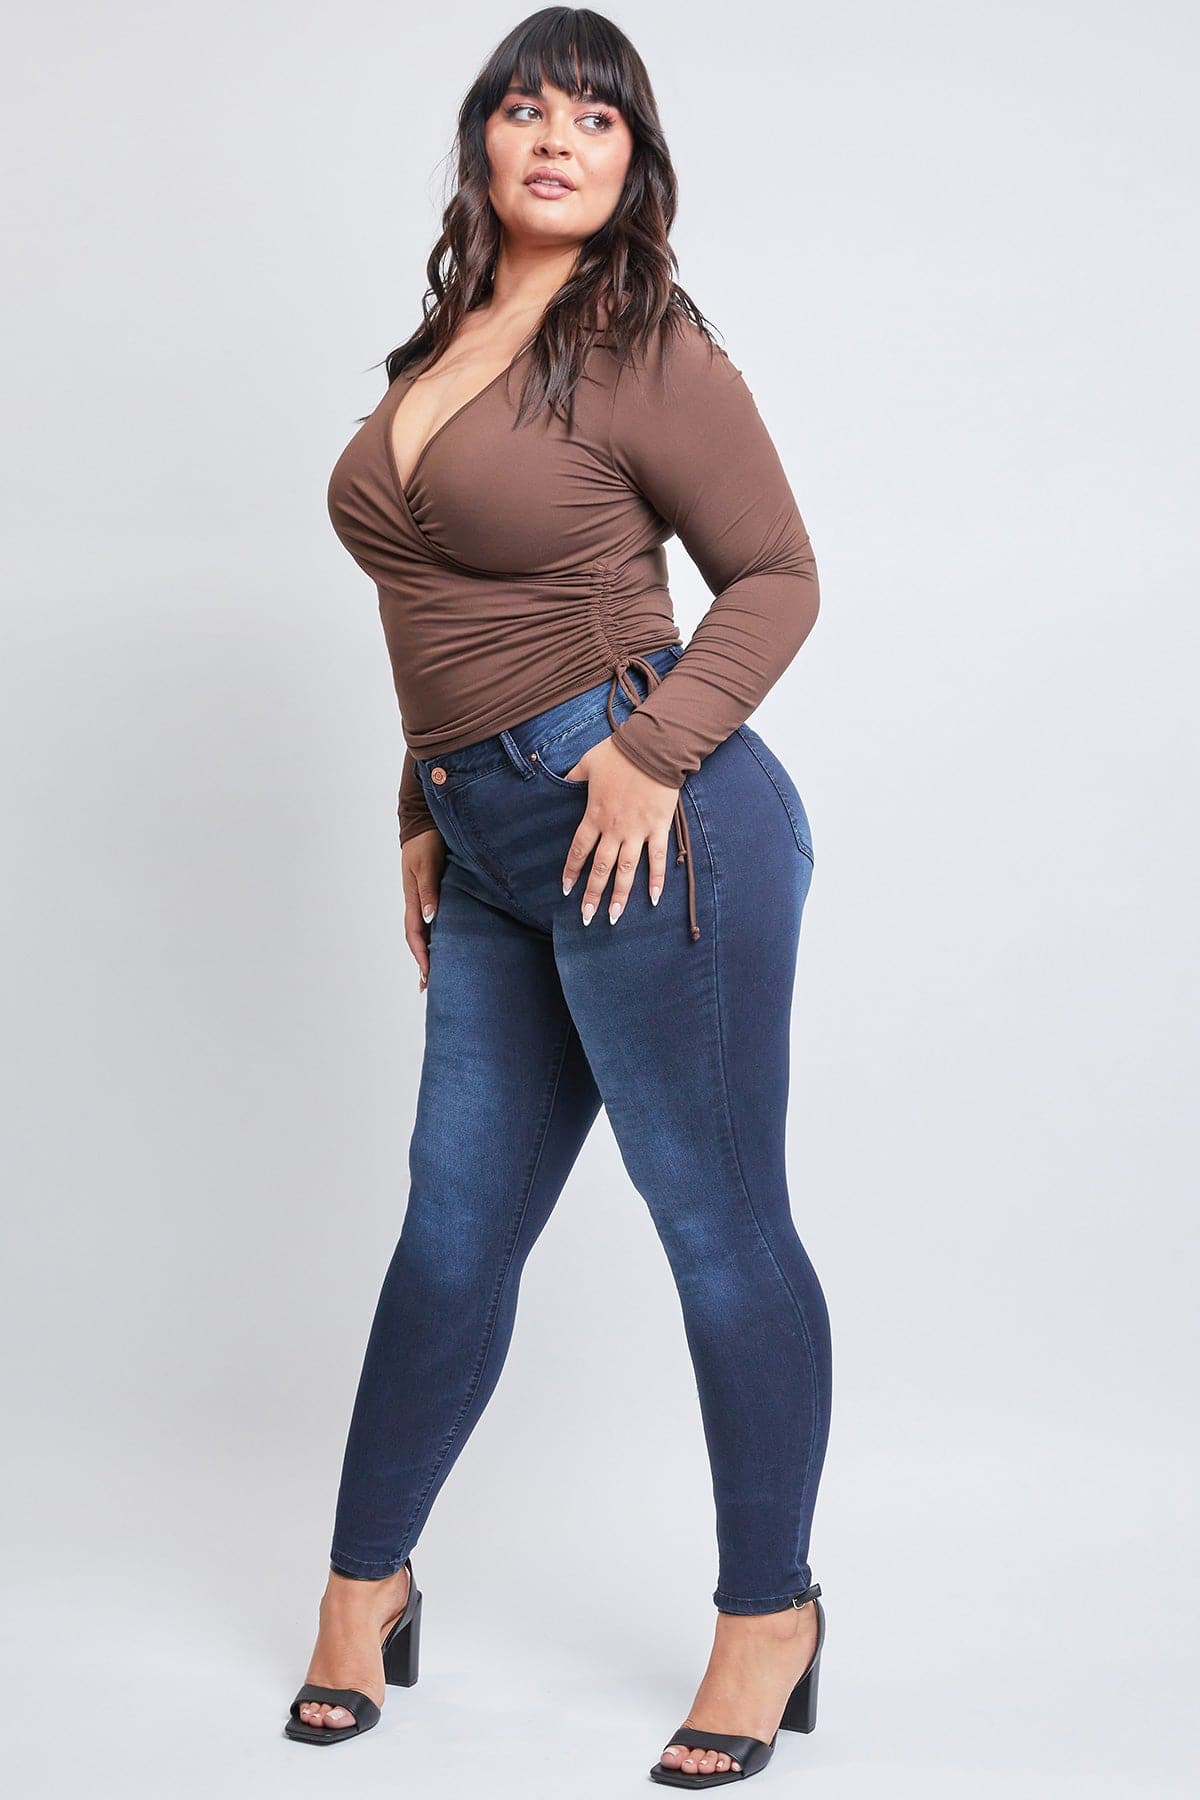 Women's Plus Size Raw Hem Pull On Pants from ROYALTY – Royalty For me